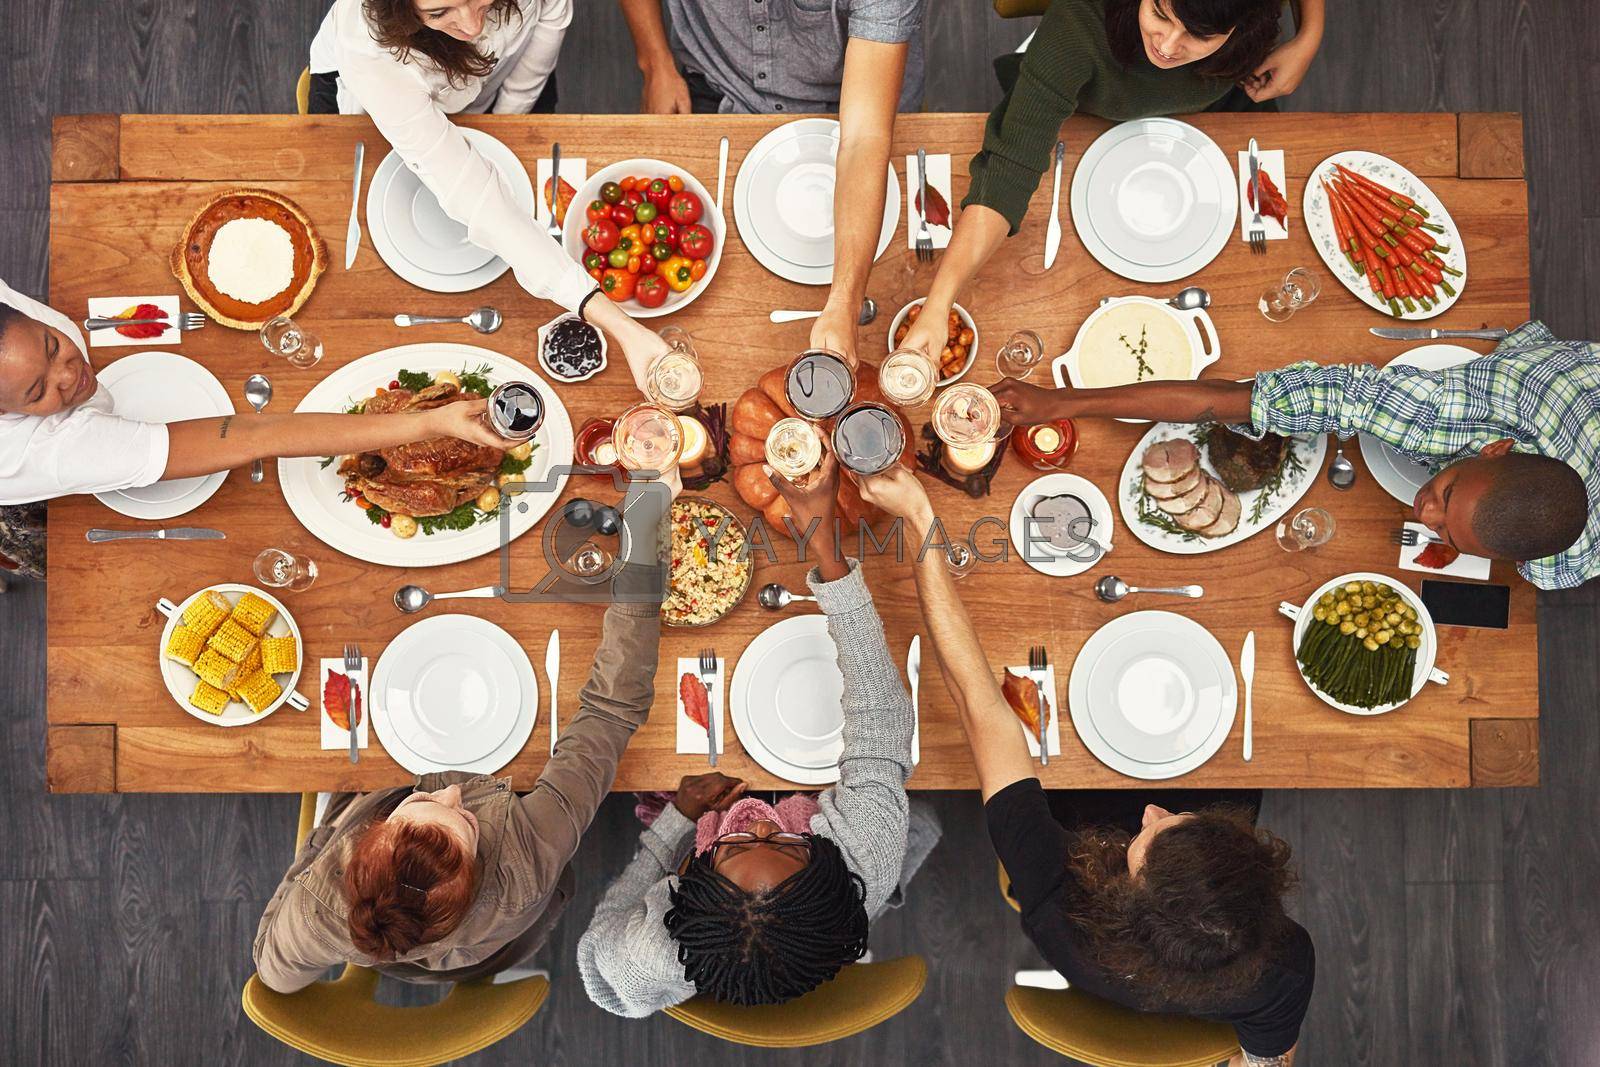 Shot of a group of people sitting together at a dining table ready to eat.